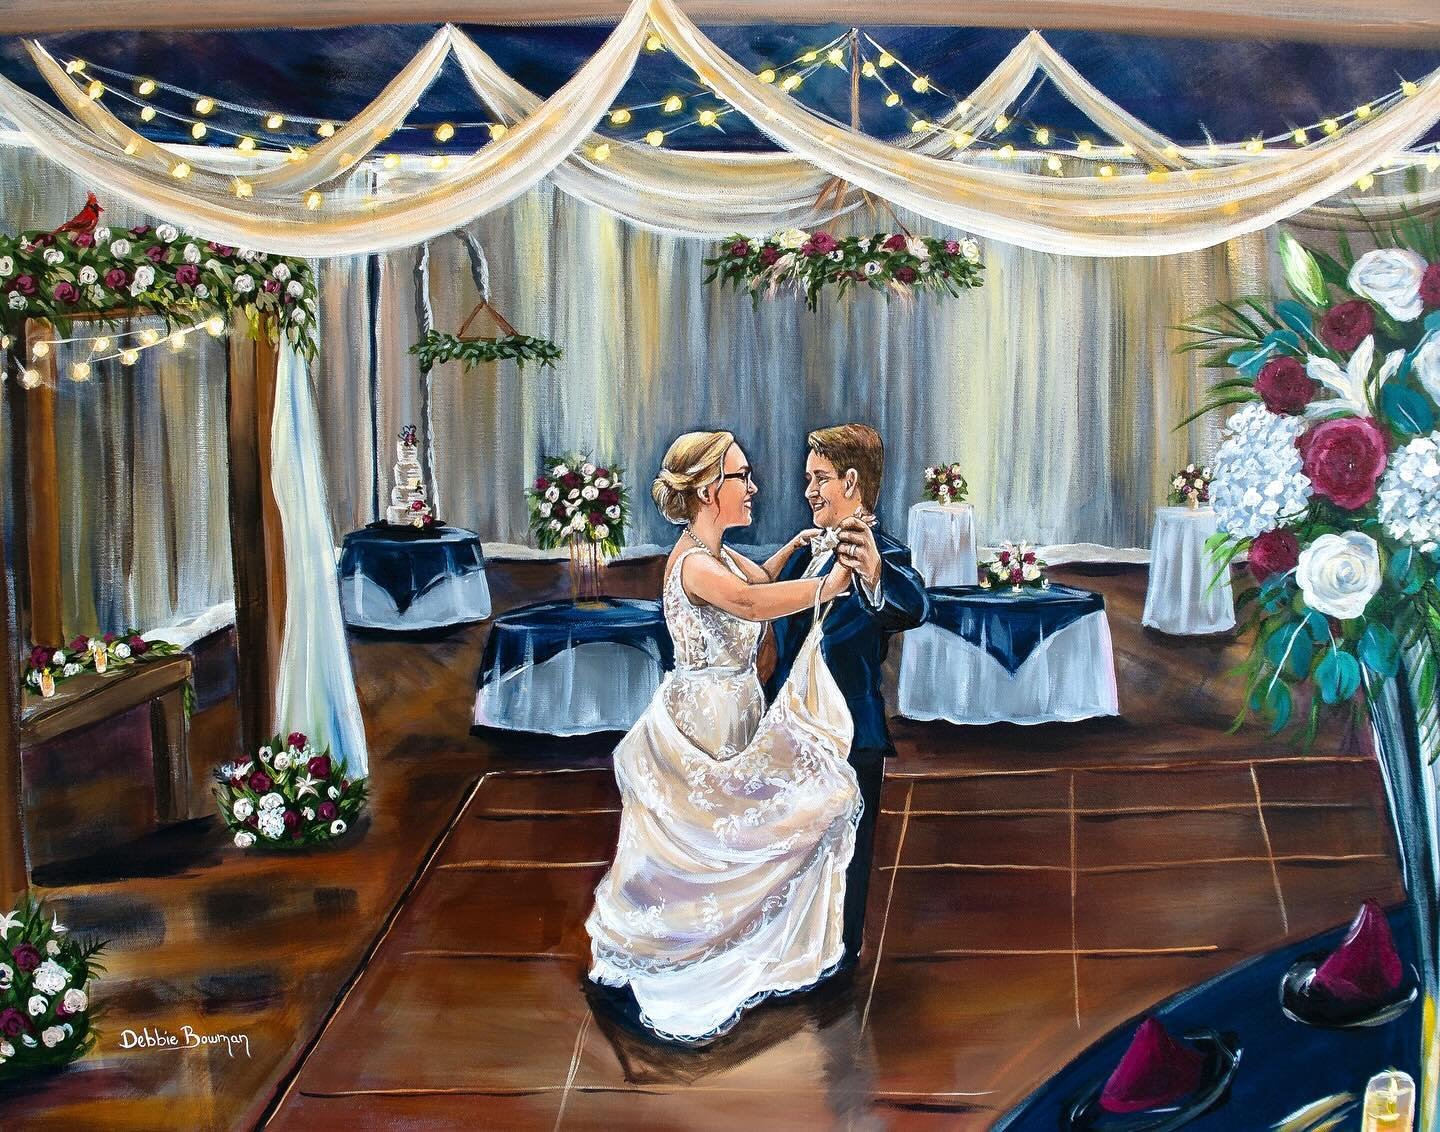 Dakota and Landon&rsquo;s 23x30 live wedding painting. They wanted their first dance and had the most beautifully choreographed dance, mix that with the lighting and we decided to do a pose afterwards when we were unable to get a shot with both their